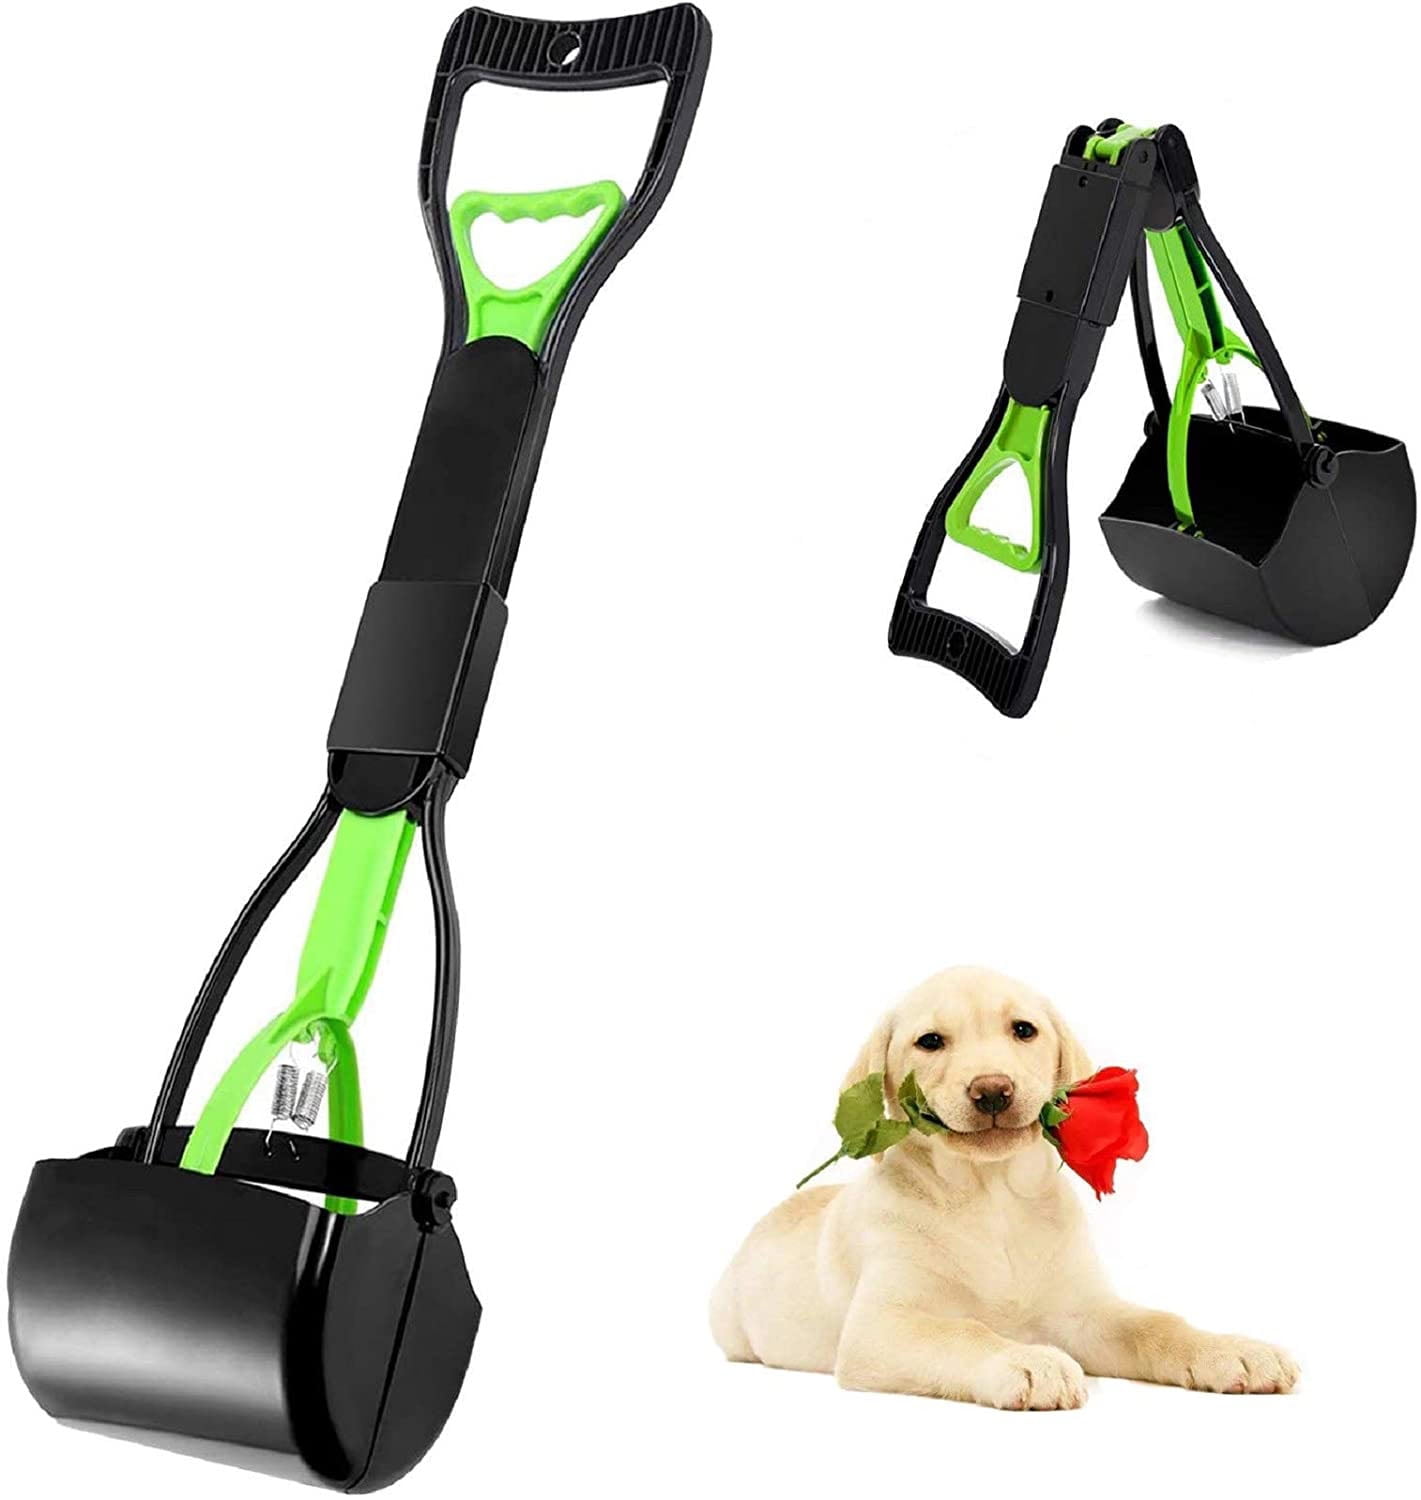 Grass Gravel TIMINGILA 33 Long Handle Portable Pet Pooper Scooper for Large and Small Dogs,High Strength Material and Durable Spring,Great for Lawns Dirt 